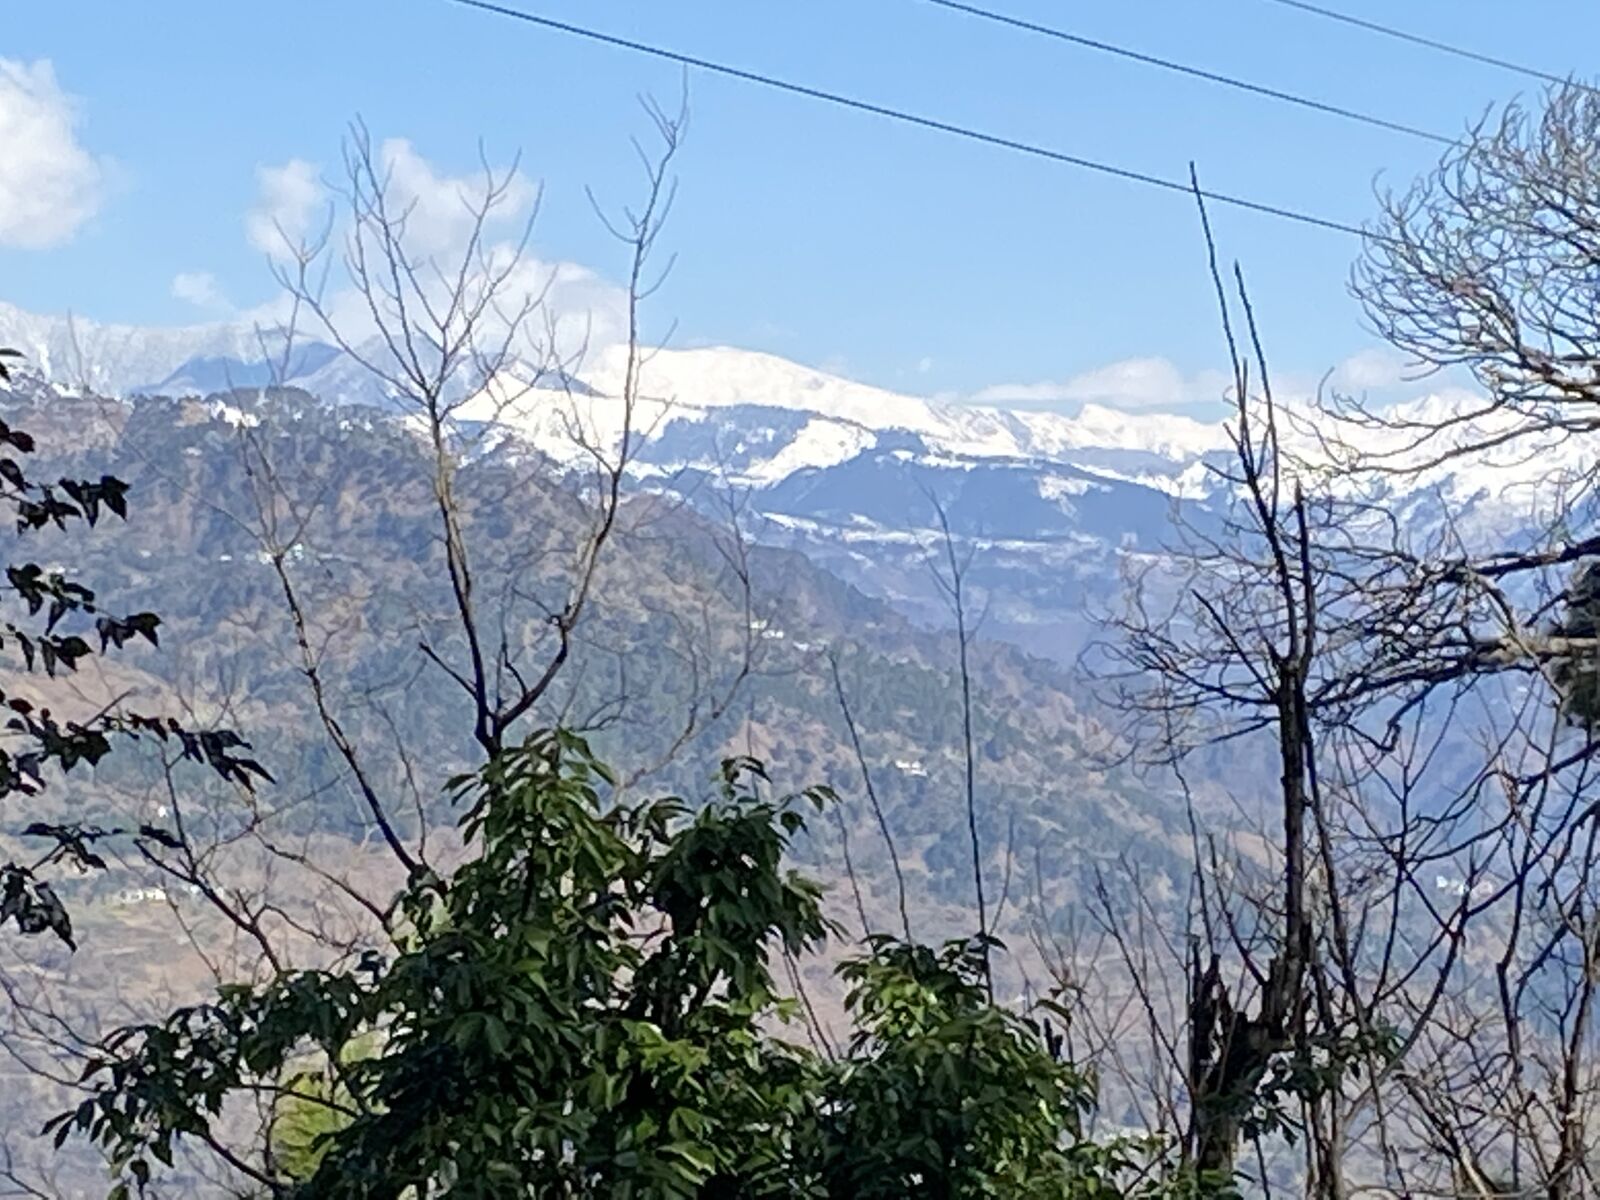 iPhone 11 back dual wide camera 4.25mm f/1.8 sample photo. Pir panjal range from photography